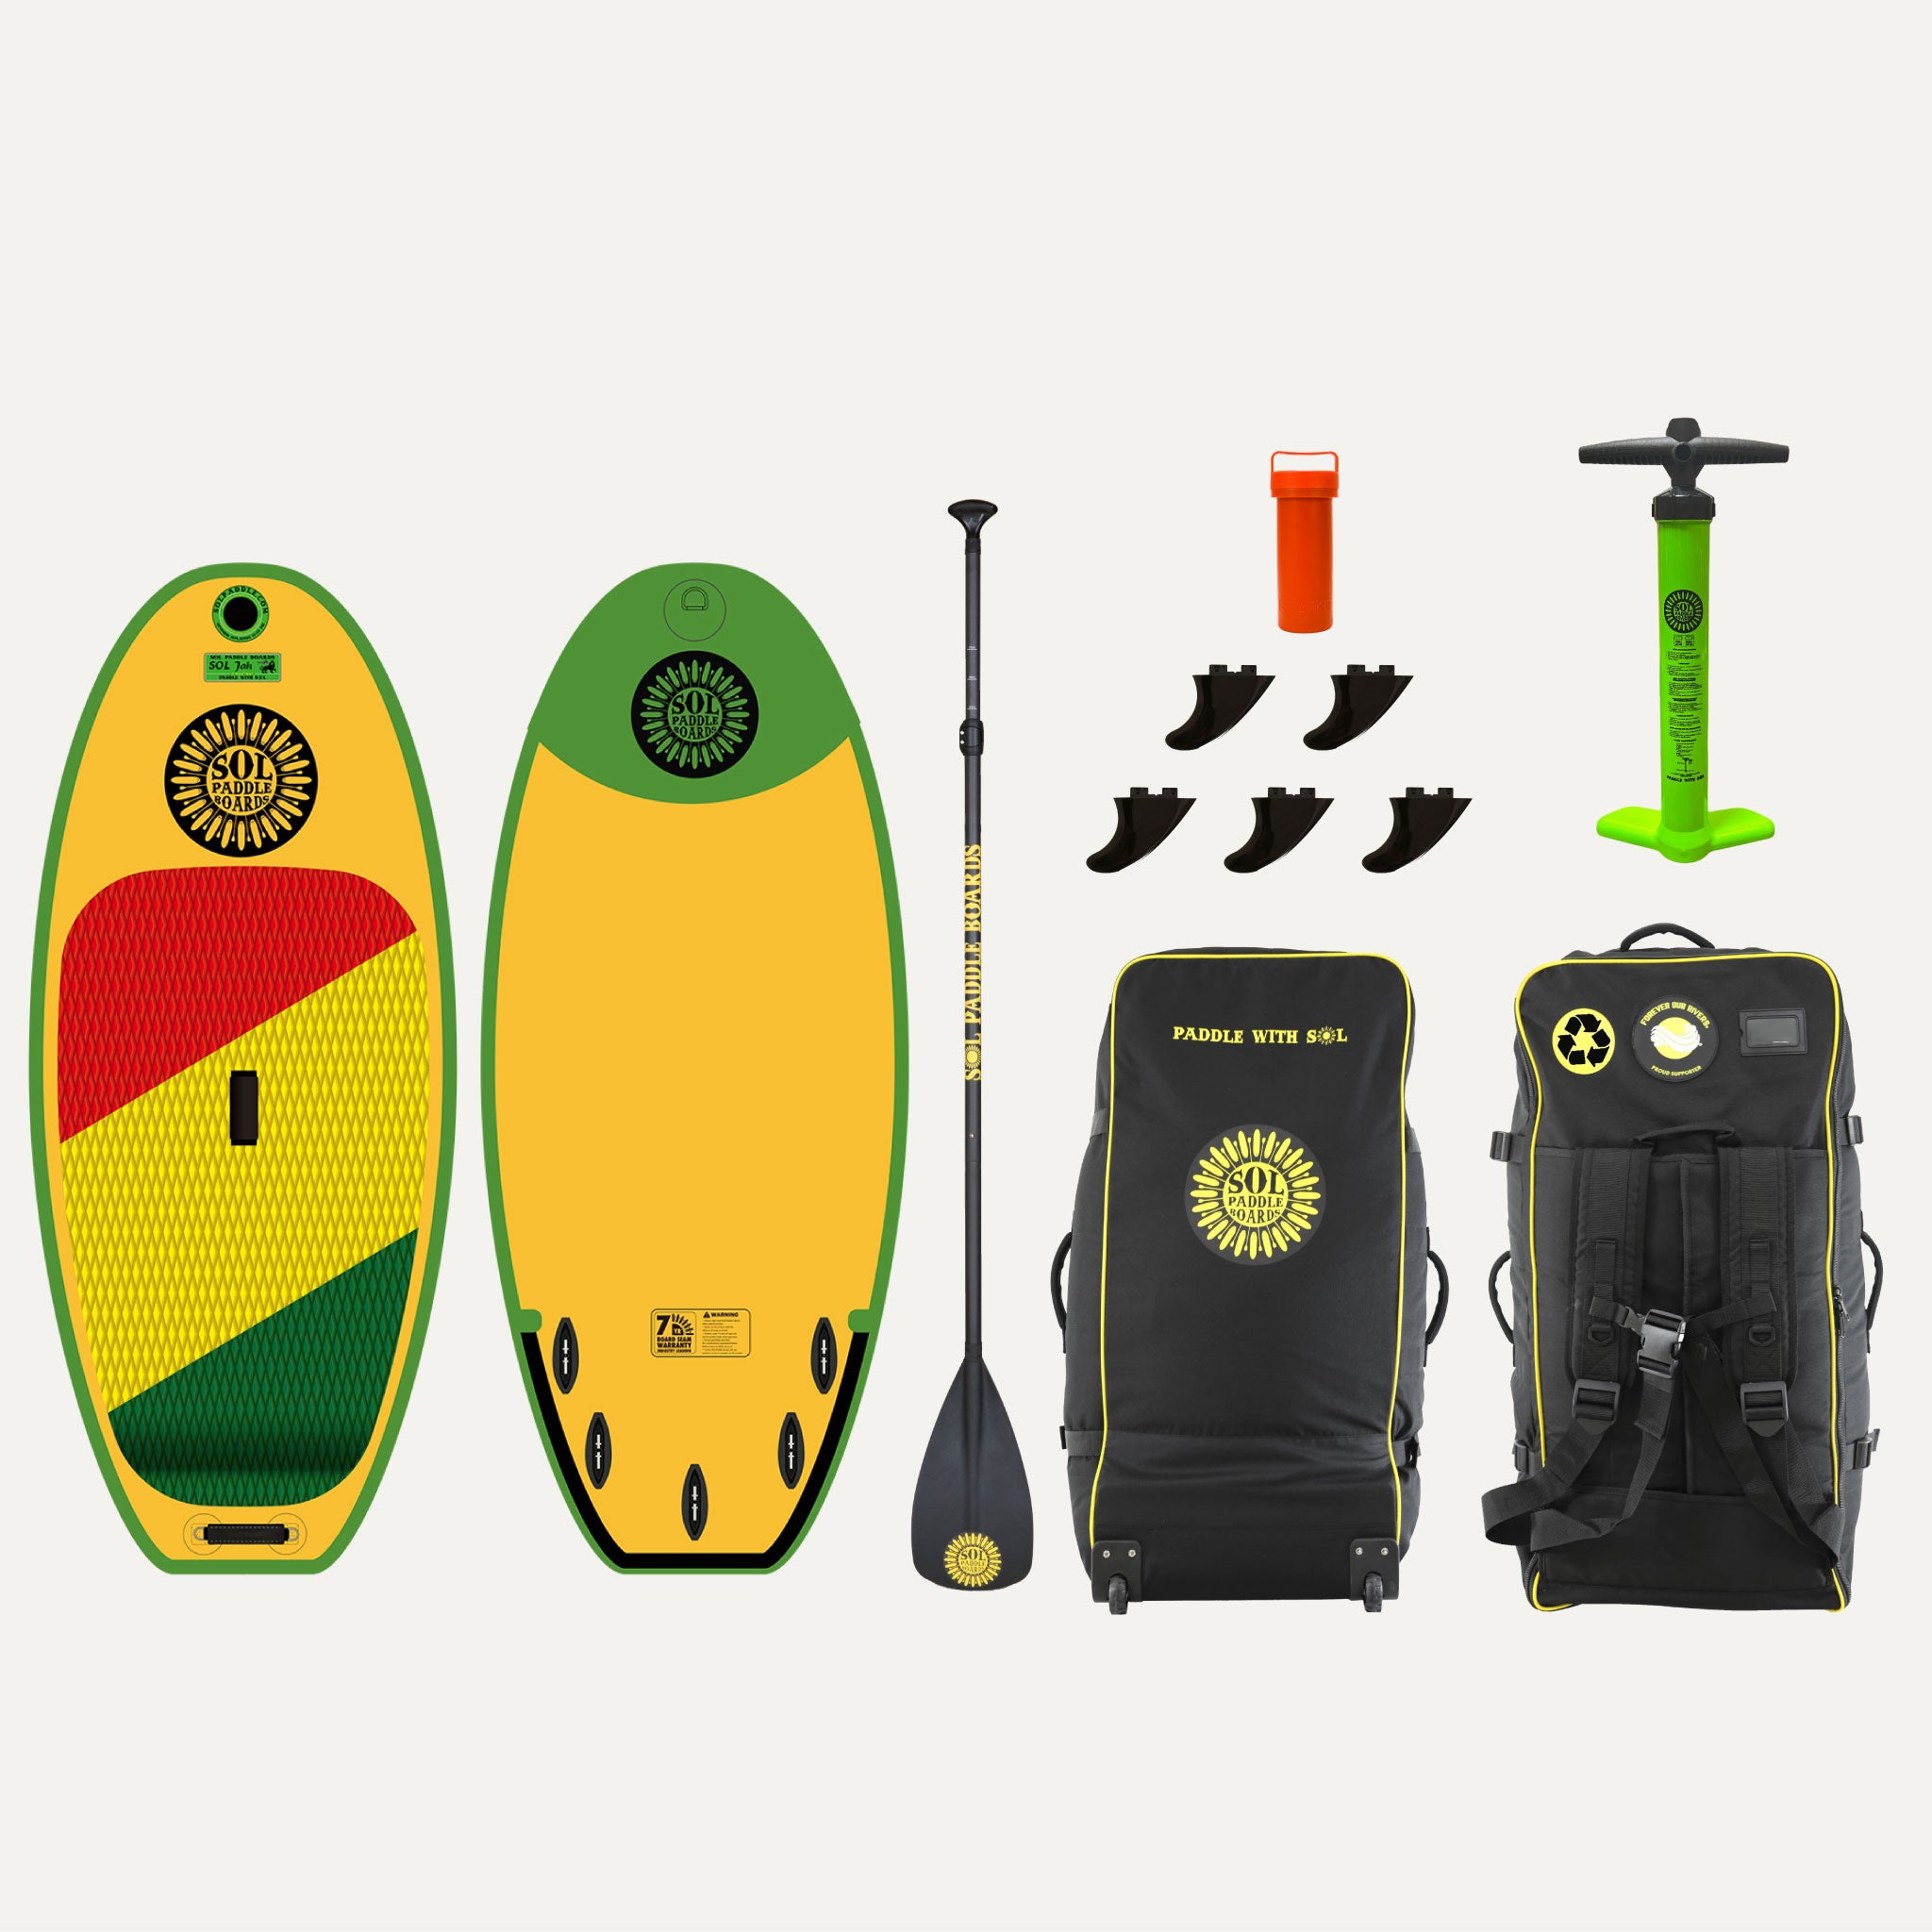 Classic SOLjah Inflatable River Surfboard showcasing the top and bottom views of the river surfboard and the accessories that come with it